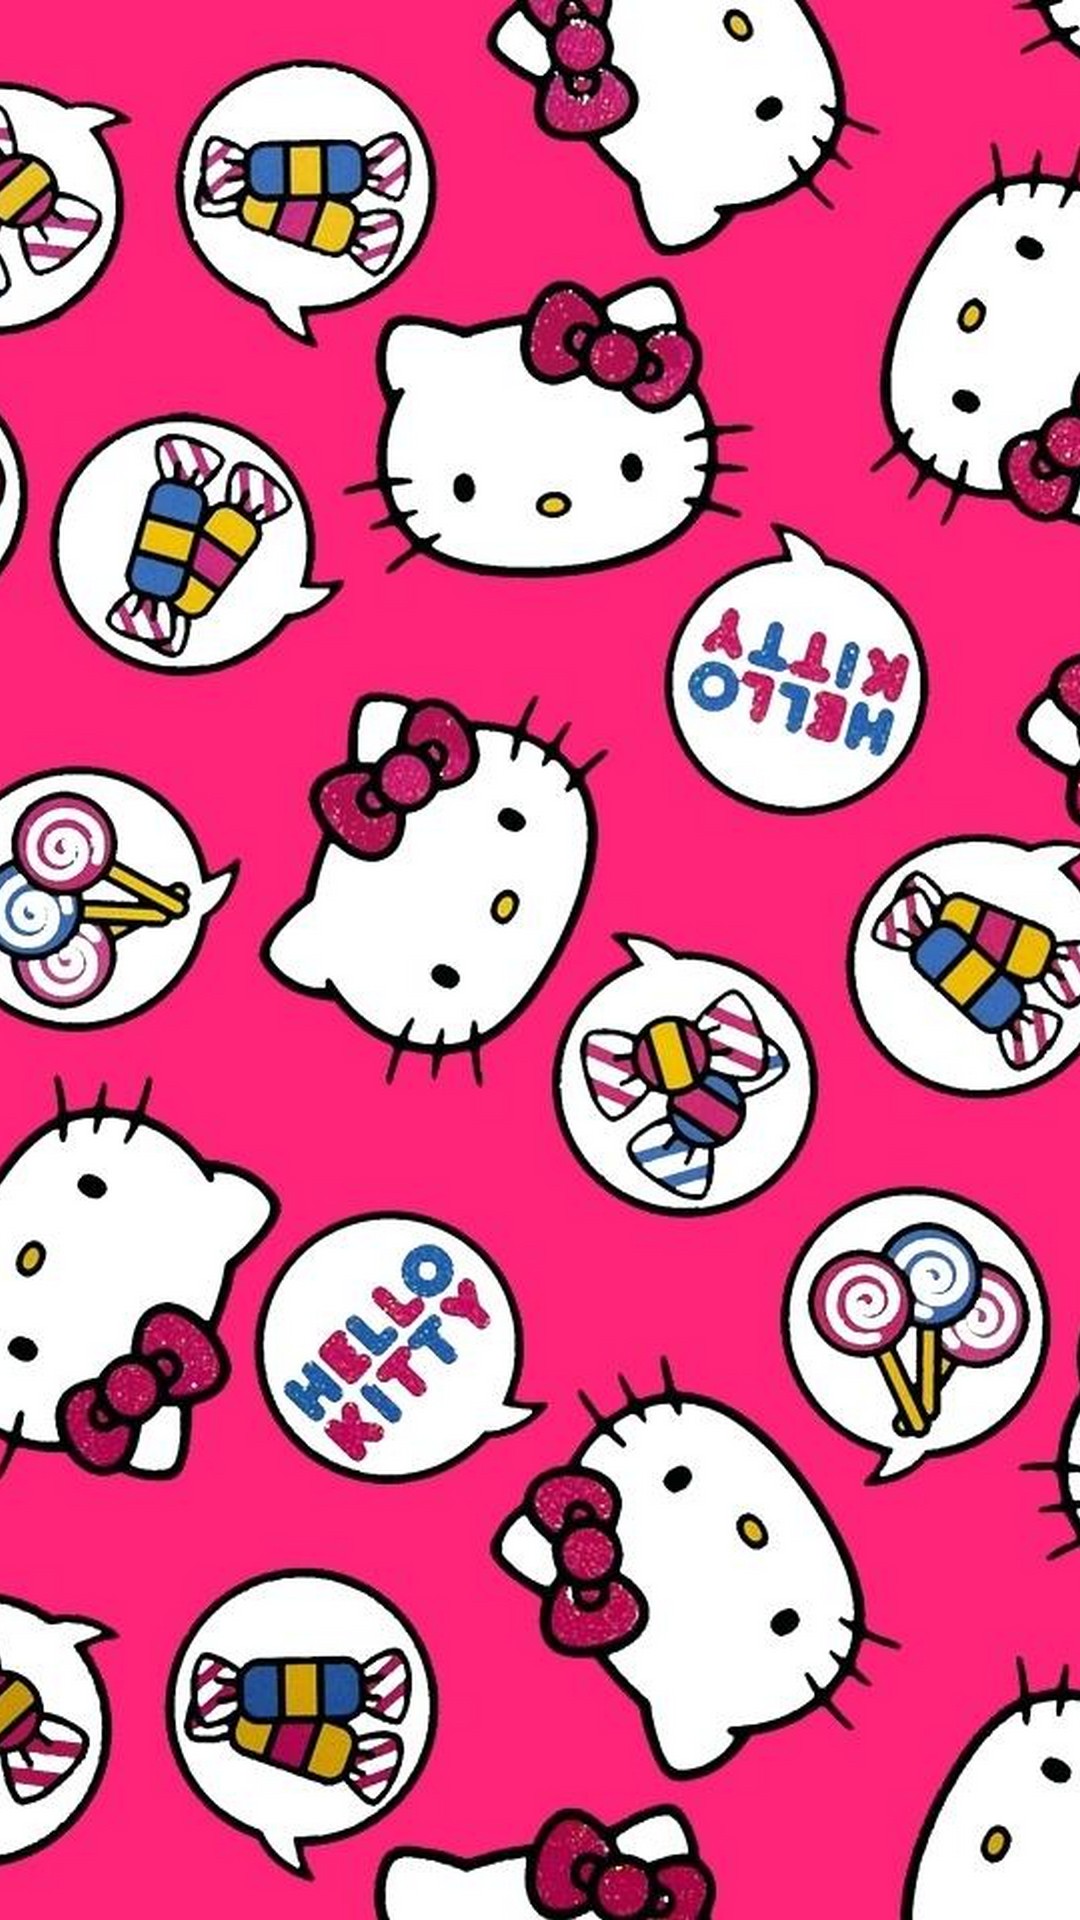 Sanrio Hello Kitty iPhone 6 Wallpaper with image resolution 1080x1920 pixel. You can use this wallpaper as background for your desktop Computer Screensavers, Android or iPhone smartphones